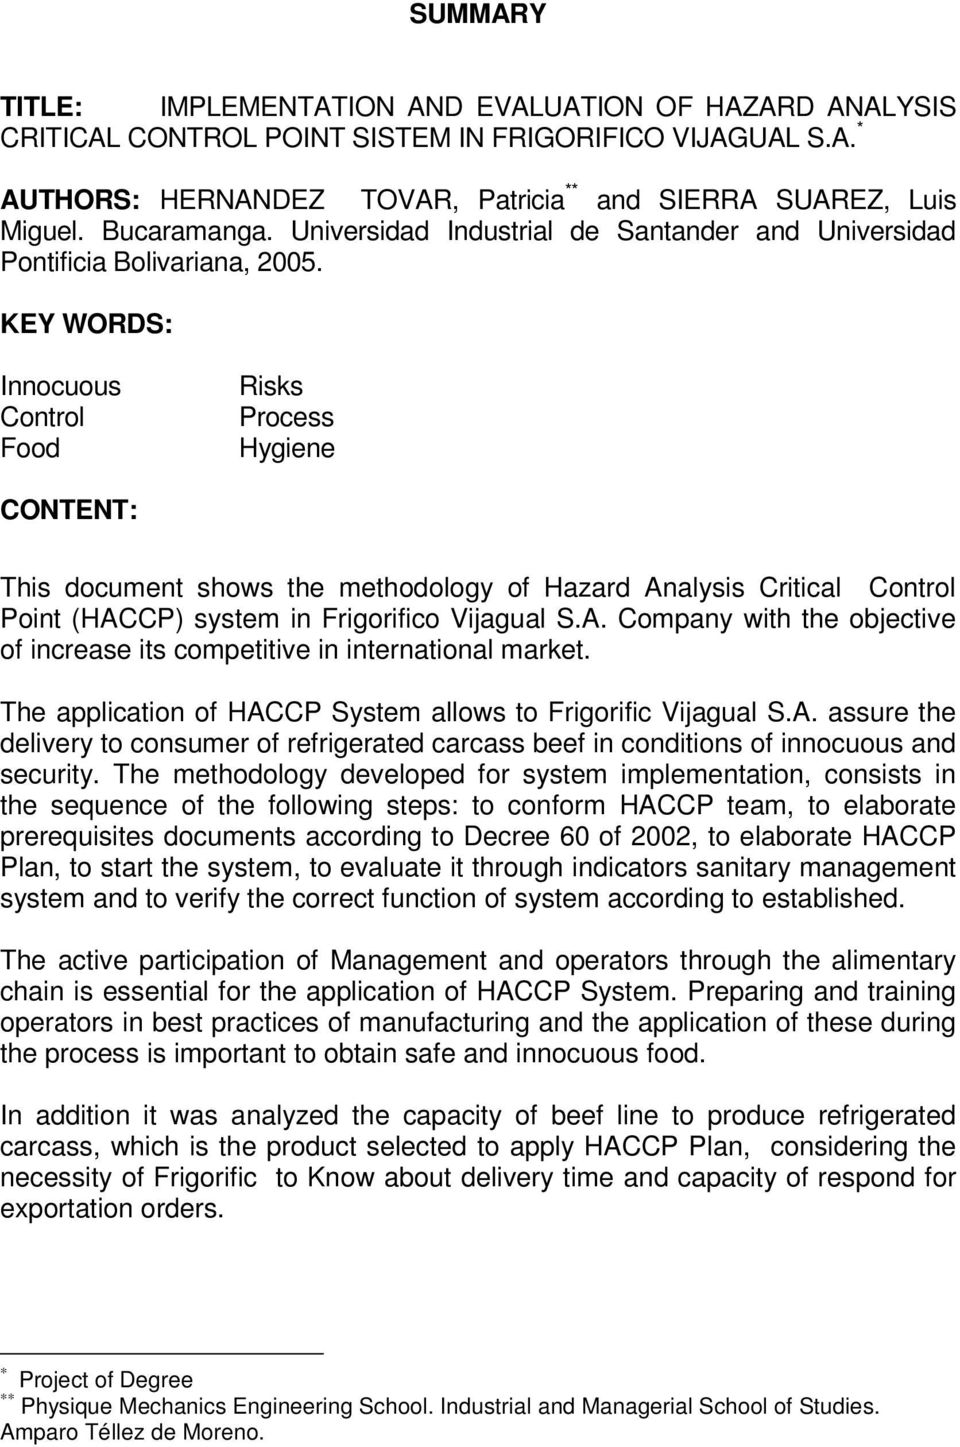 KEY WORDS: Innocuous Control Food Risks Process Hygiene CONTENT: This document shows the methodology of Hazard Analysis Critical Control Point (HACCP) system in Frigorifico Vijagual S.A. Company with the objective of increase its competitive in international market.